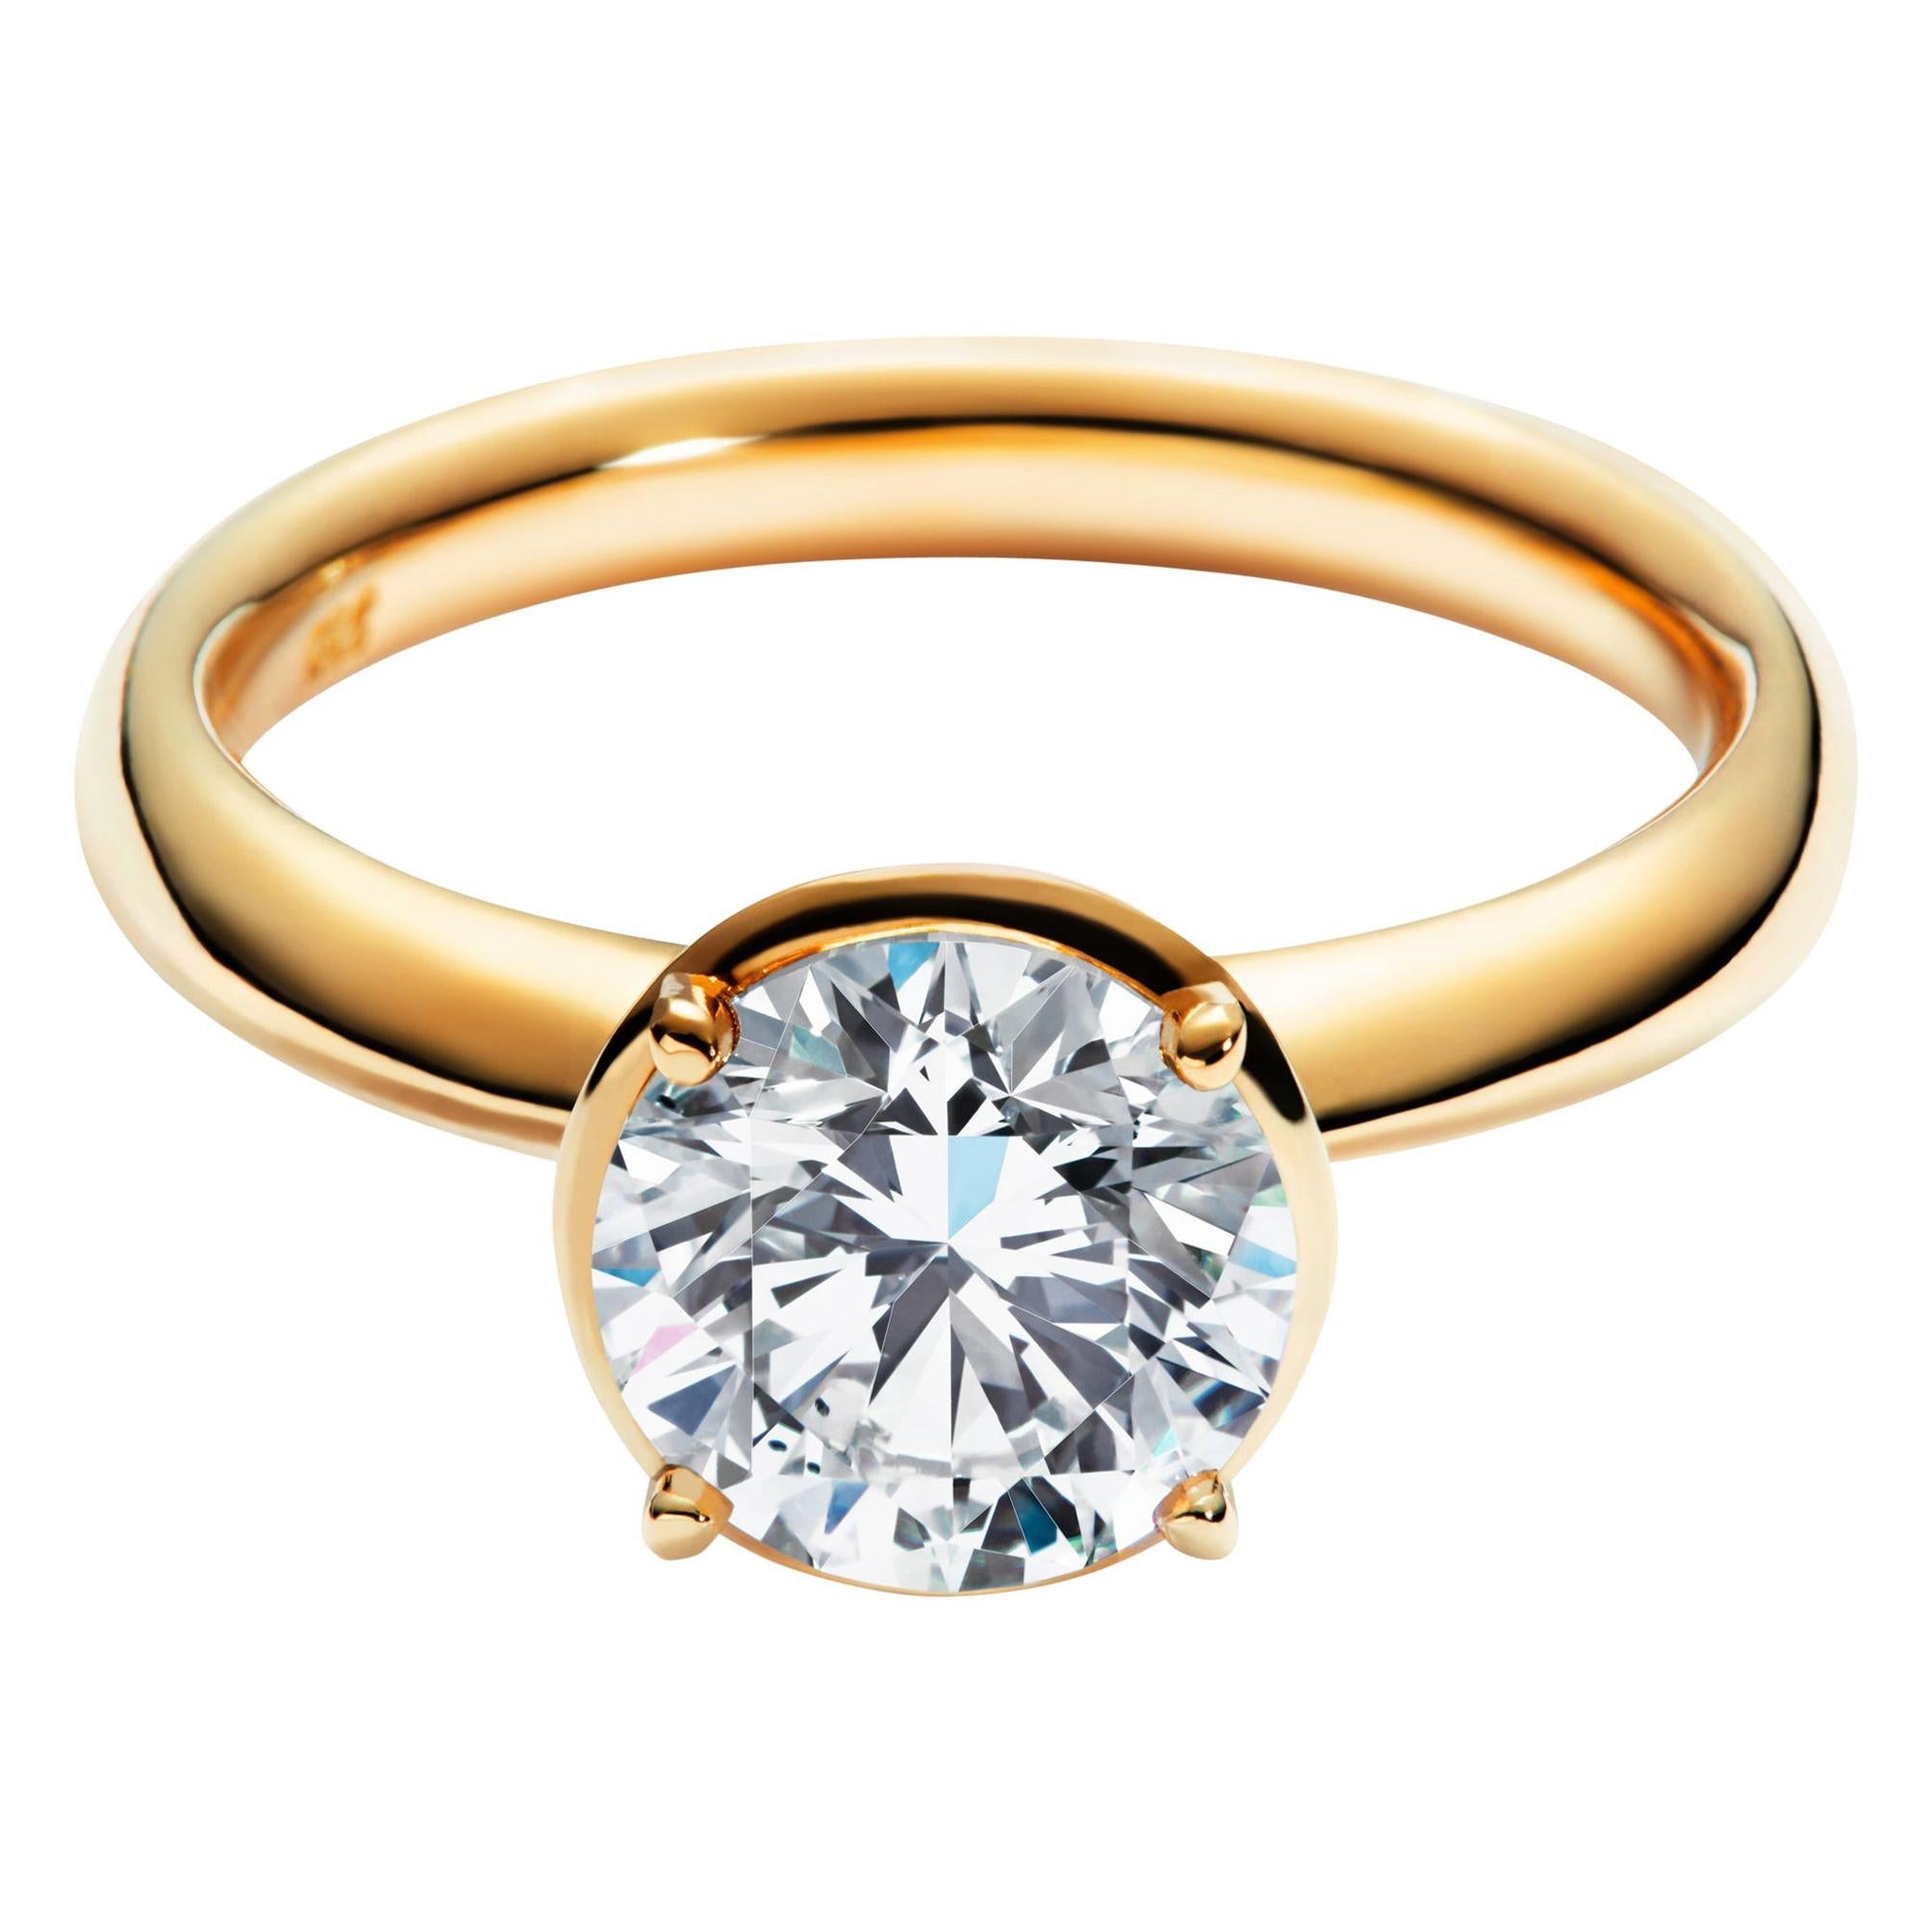 For Sale:  2ct Solitaire Traceable Diamond Ring in 18k Yellow Gold by Rocks for Life